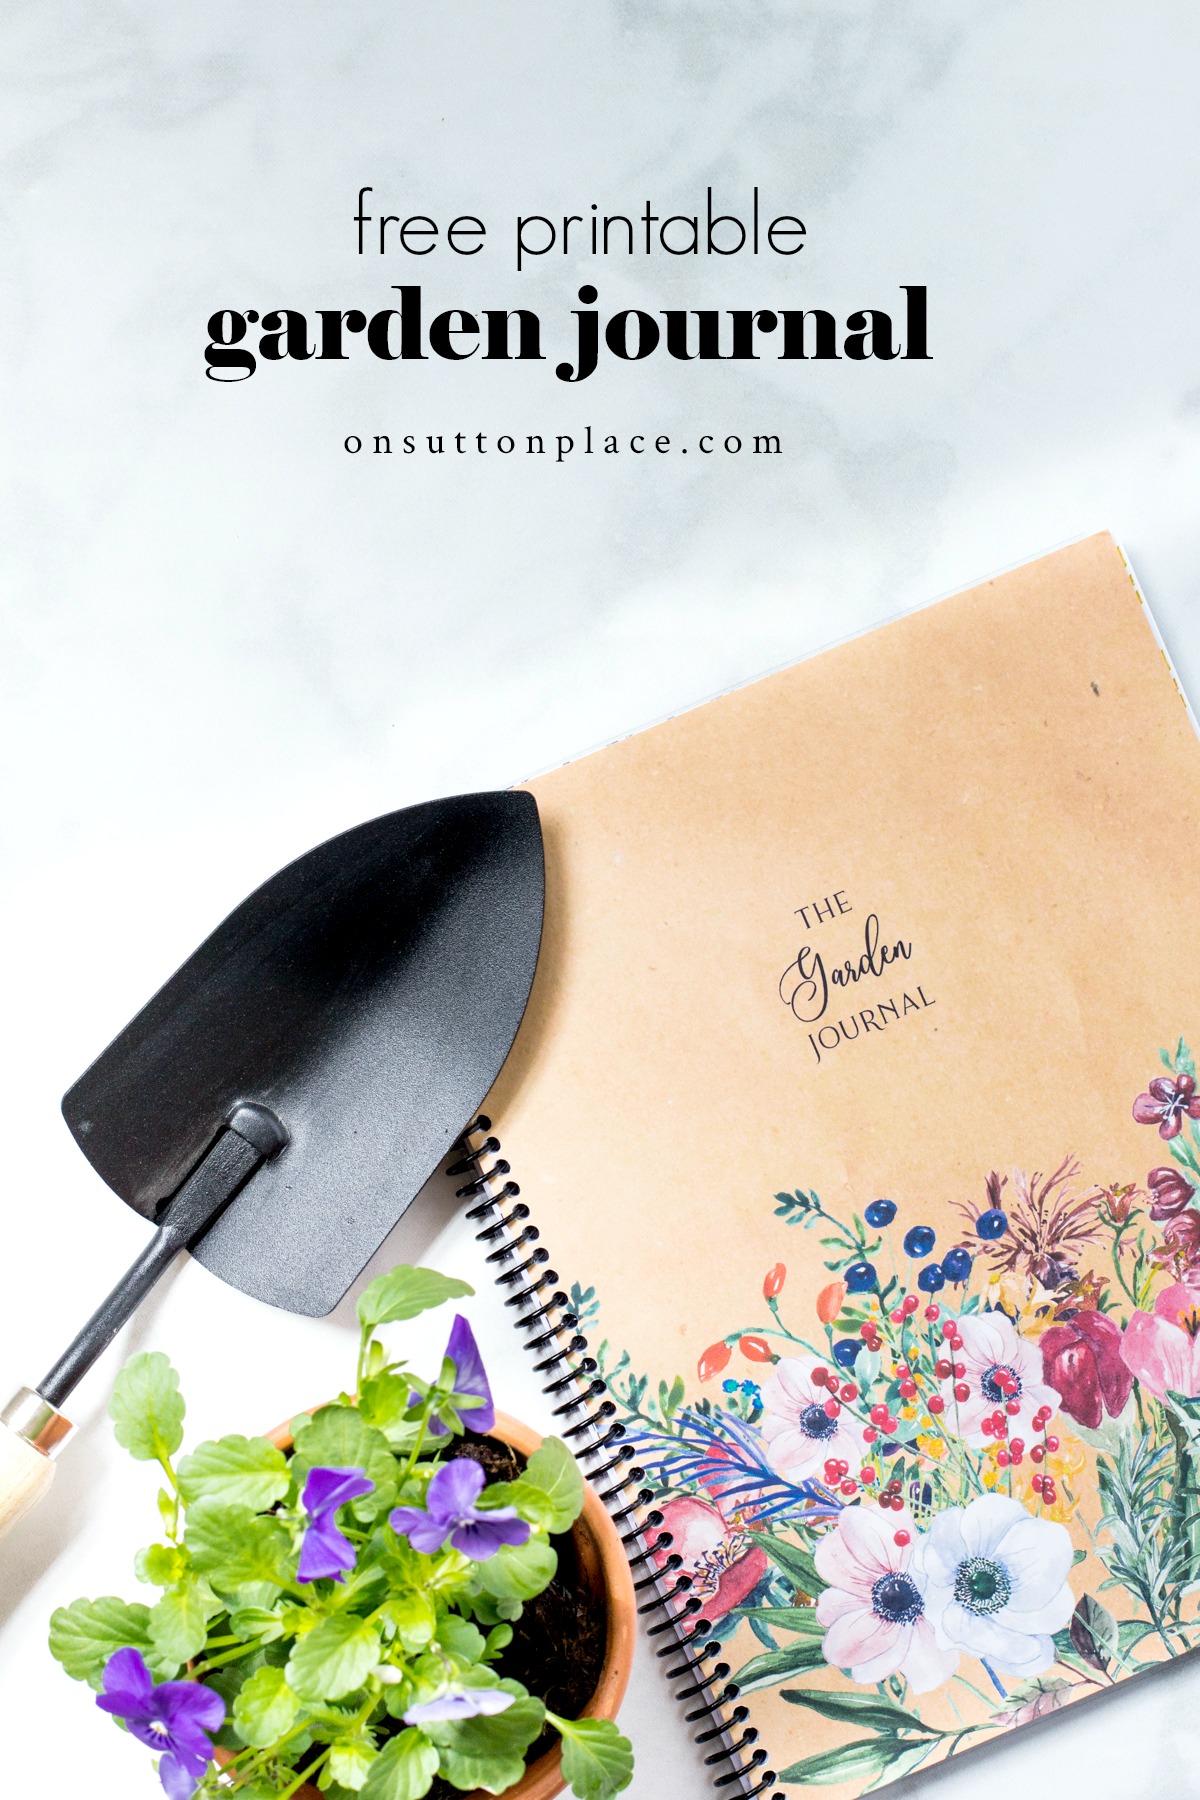 The Garden Journal (Free Digital Download) On Sutton Place